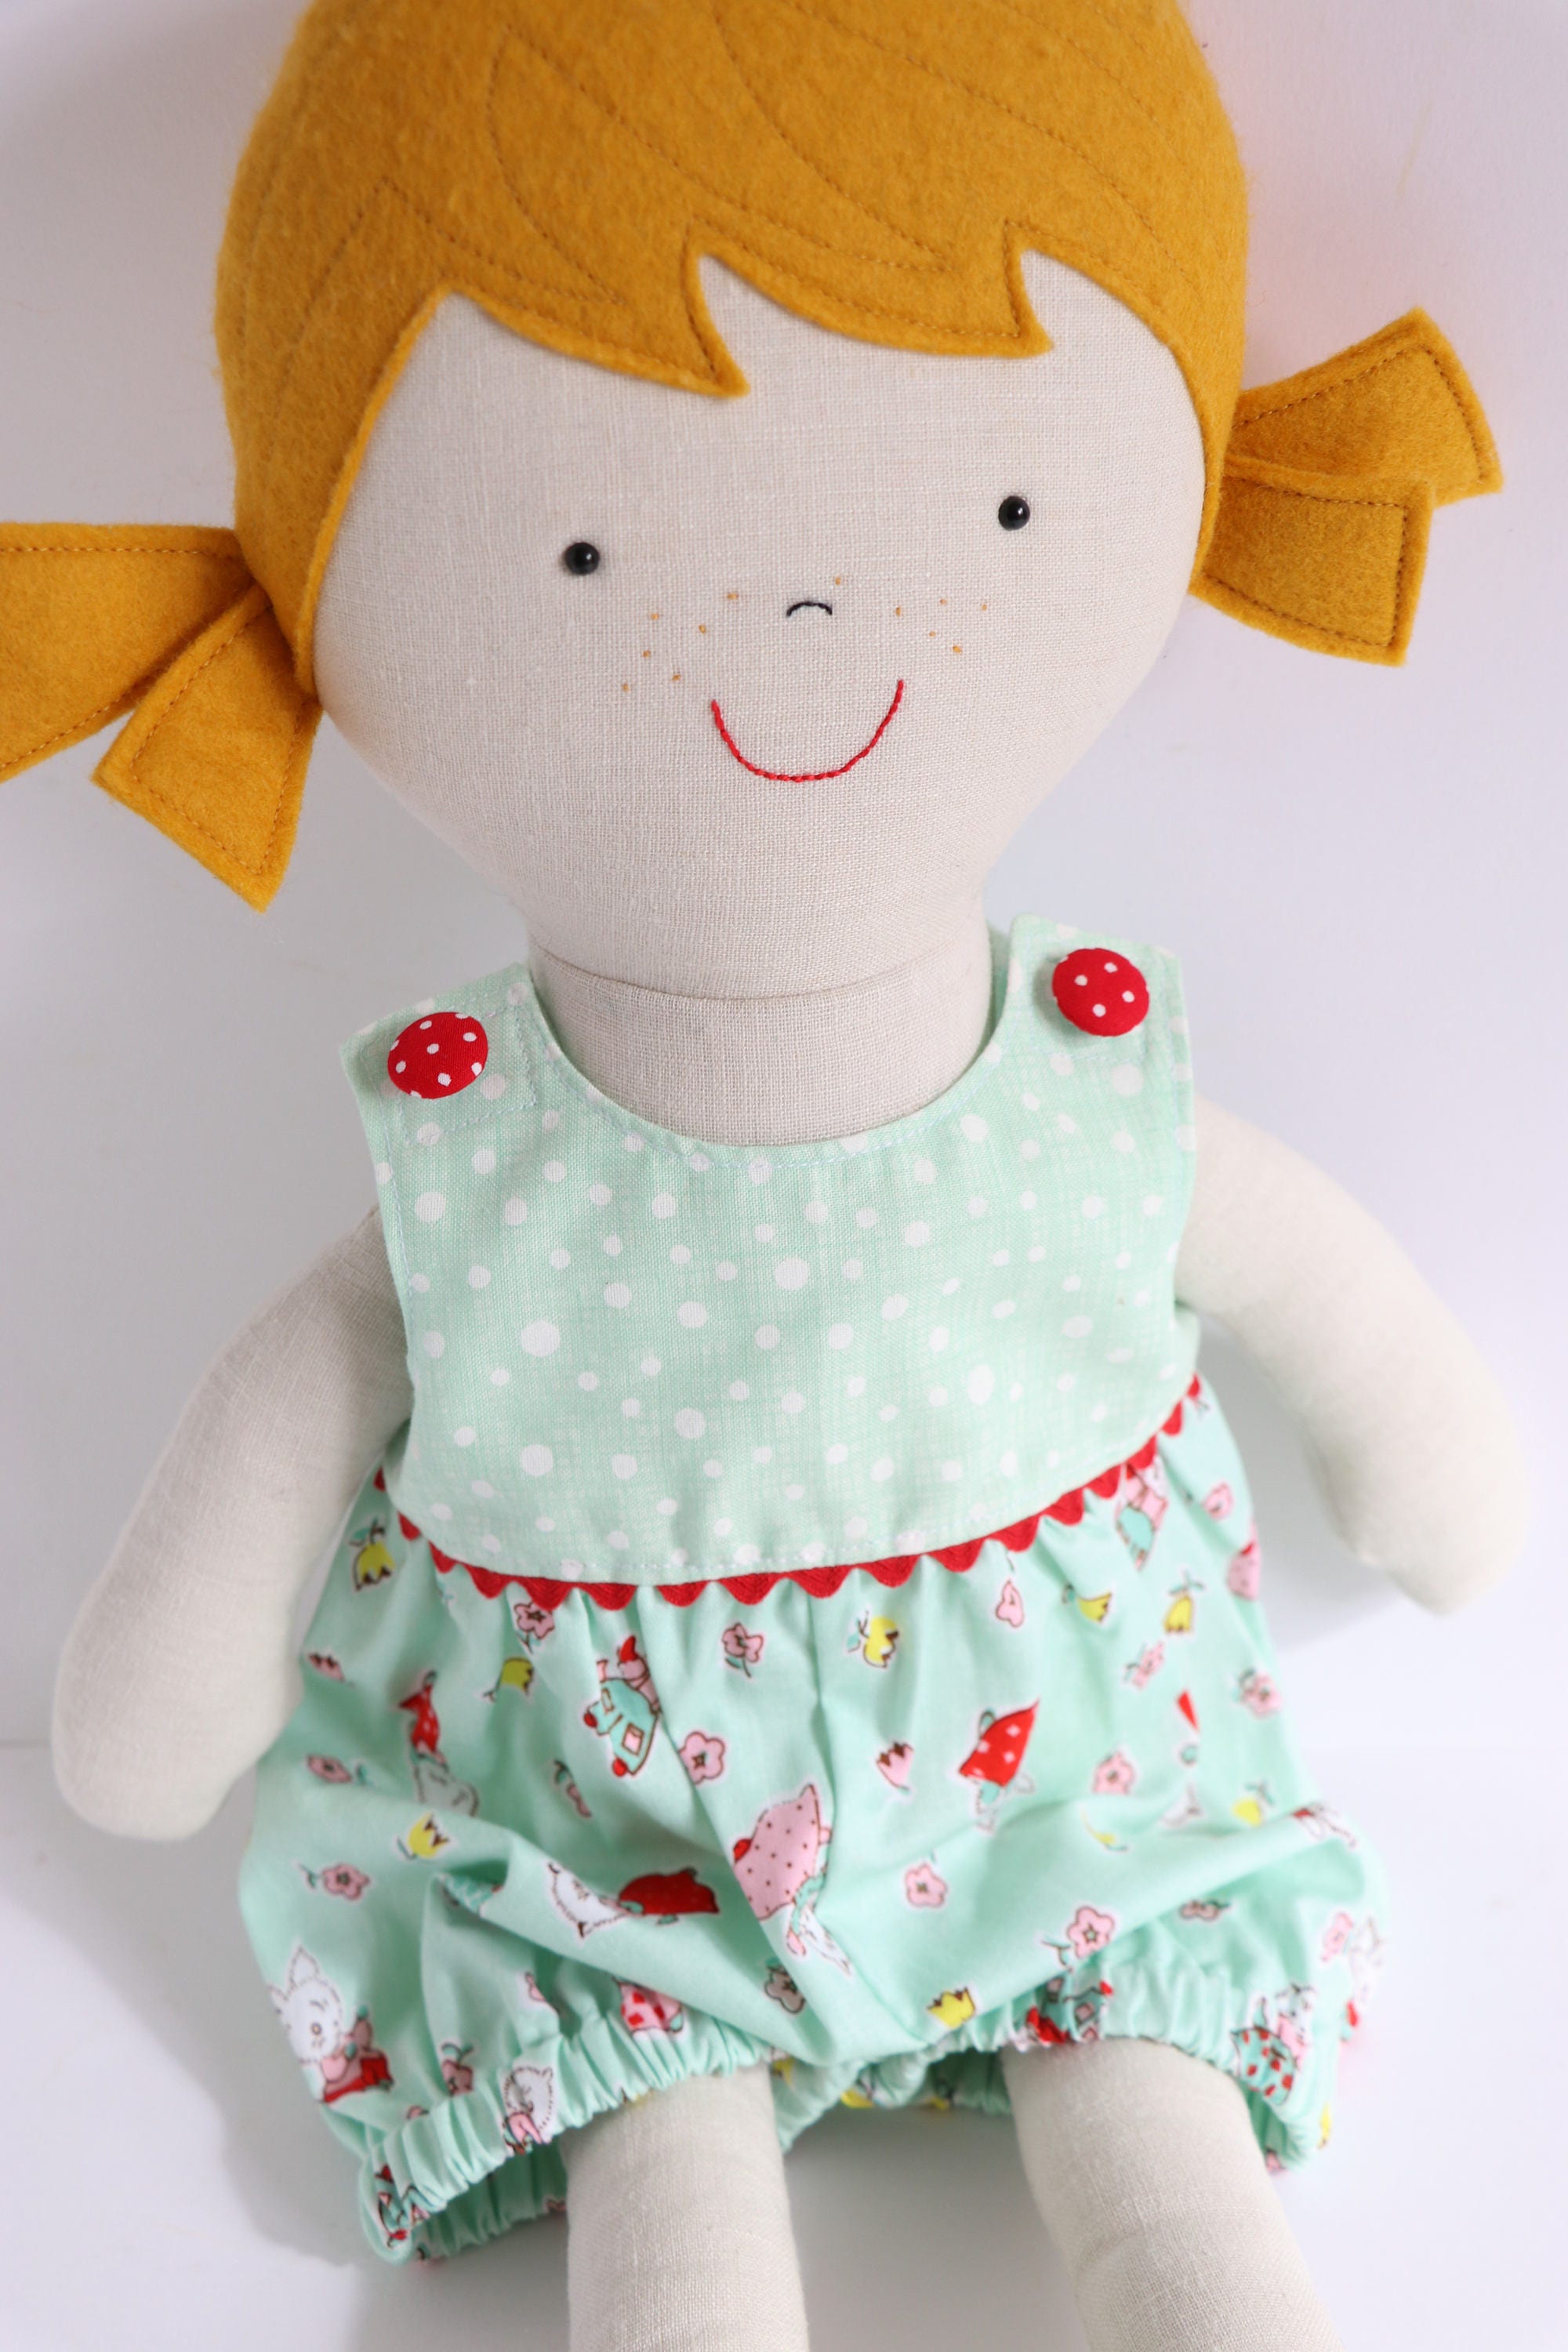 Tilly: Large doll with clothes sewing pattern